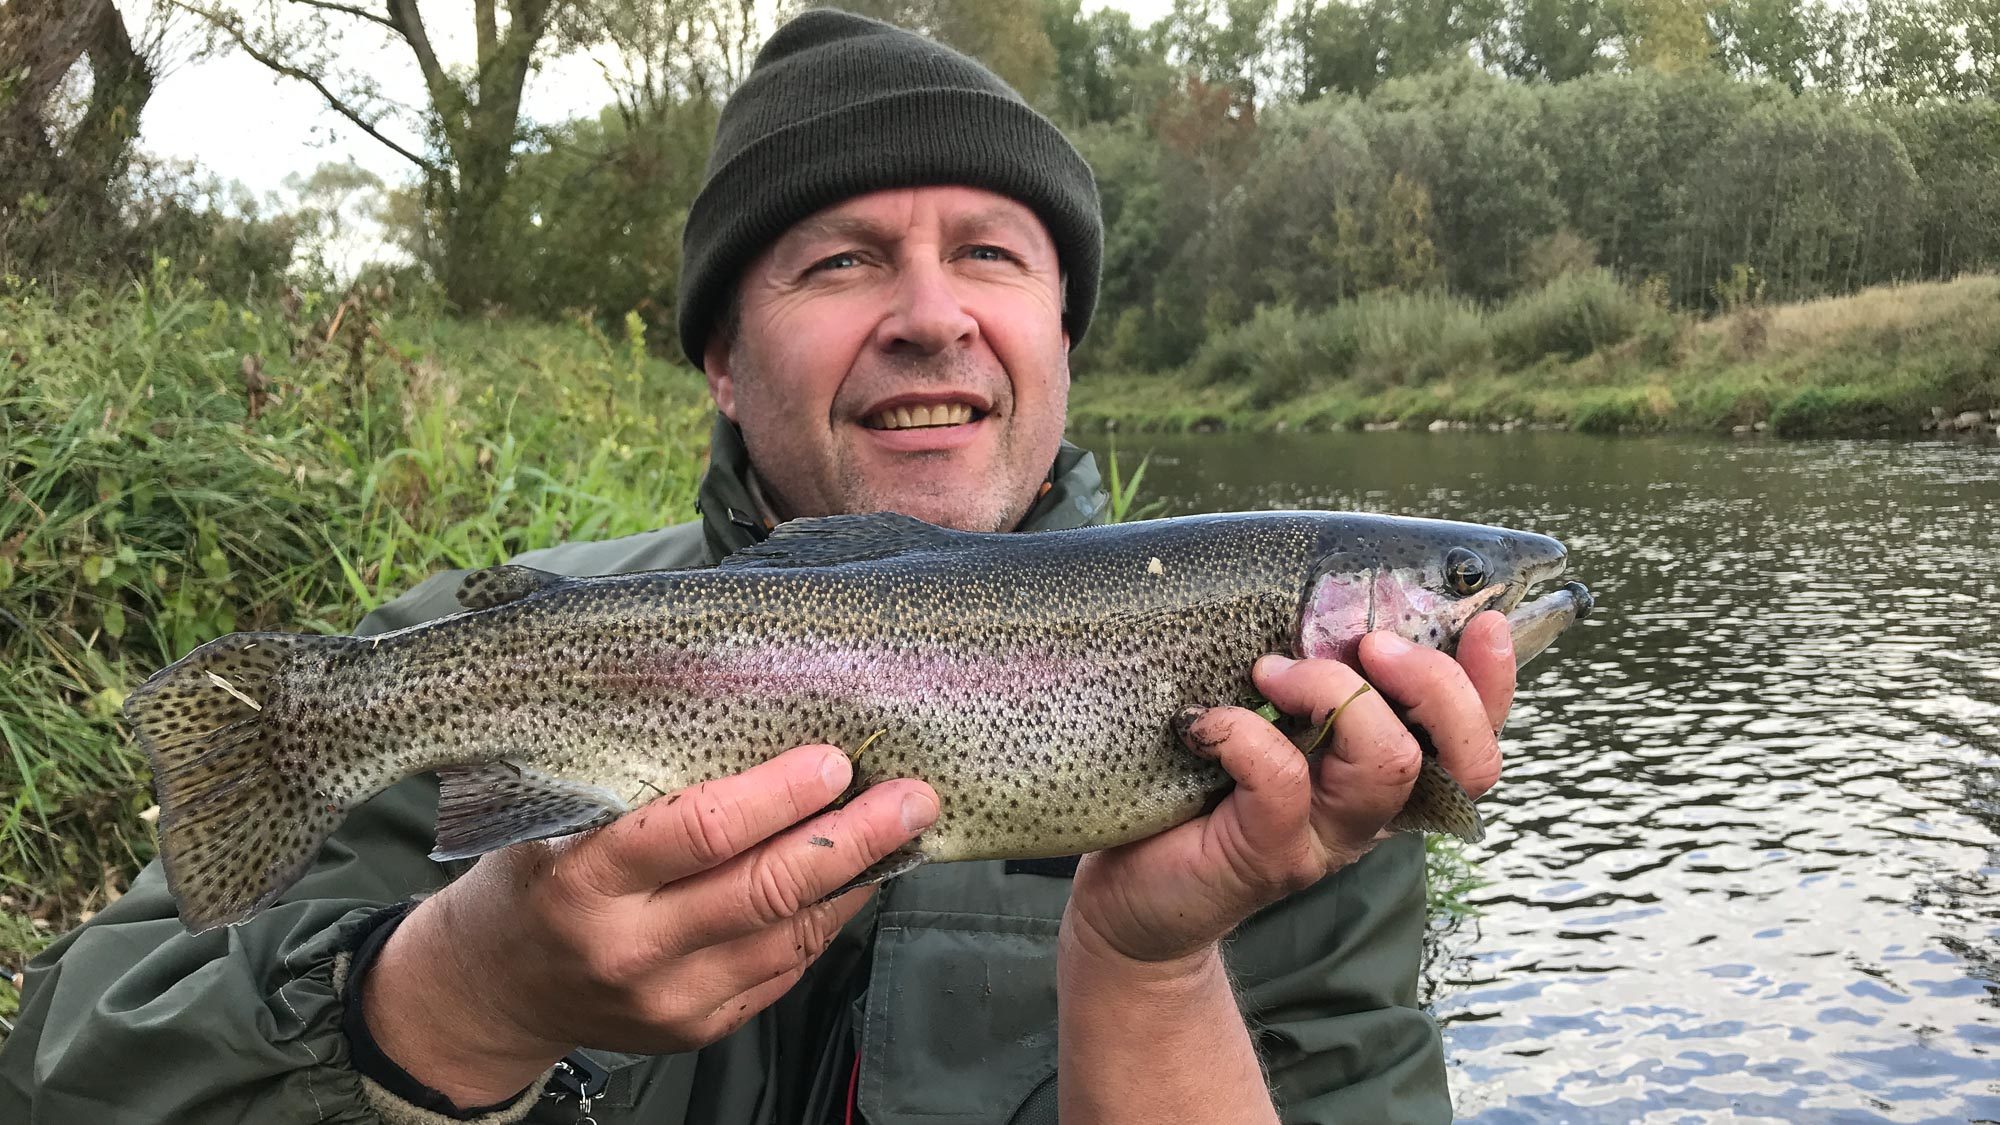 Course fishing for trophy trout